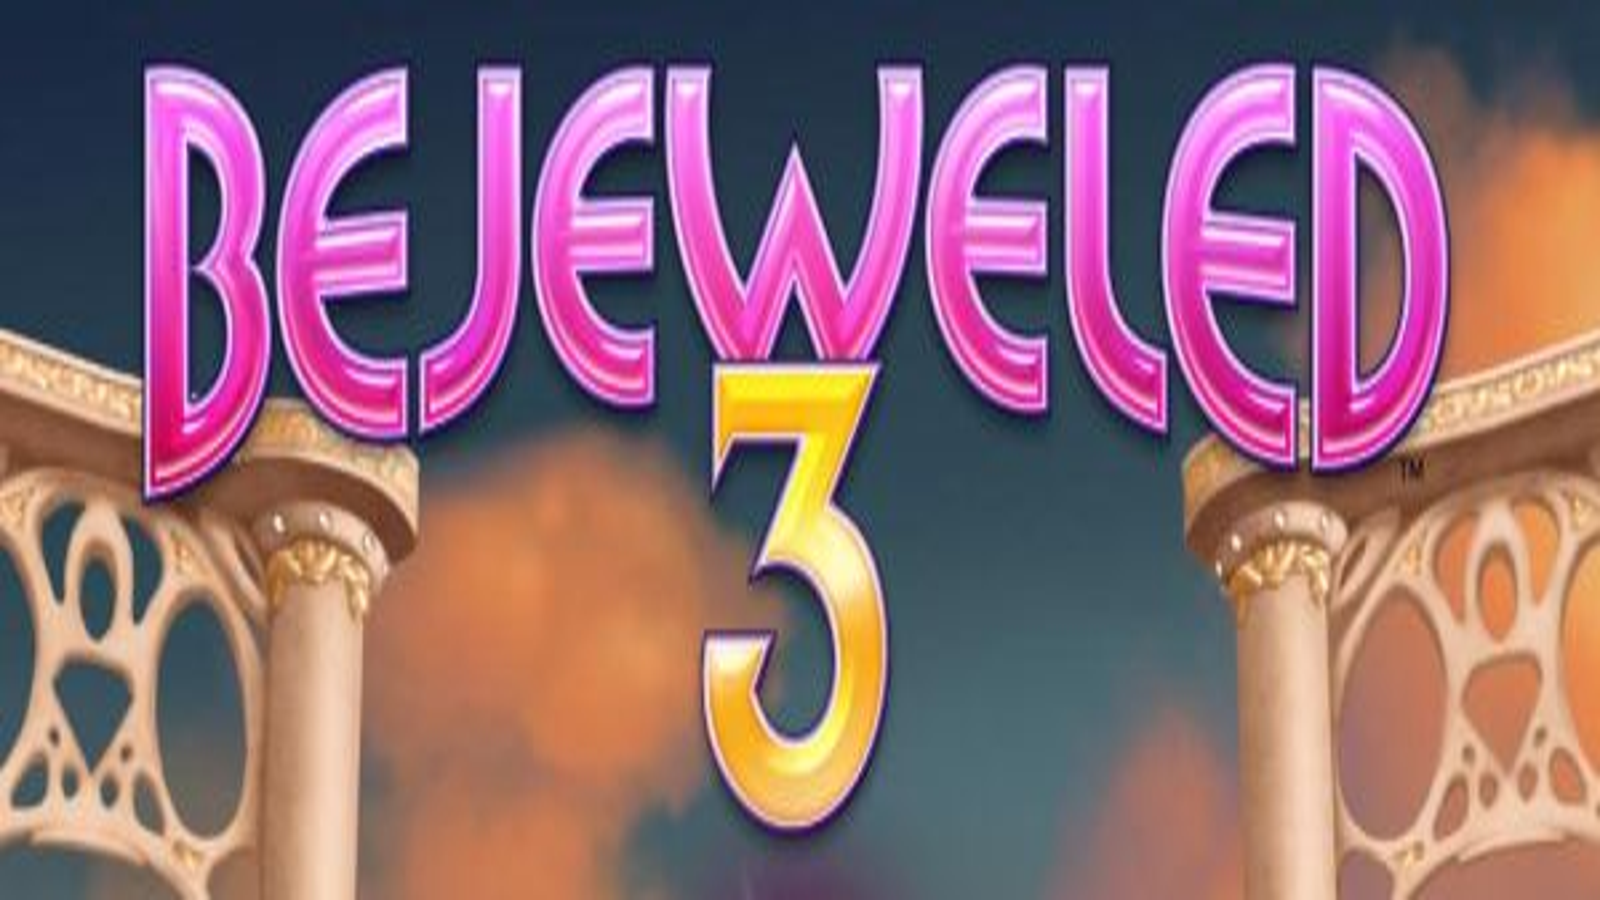 Bejeweled 3 at the most competitive prices